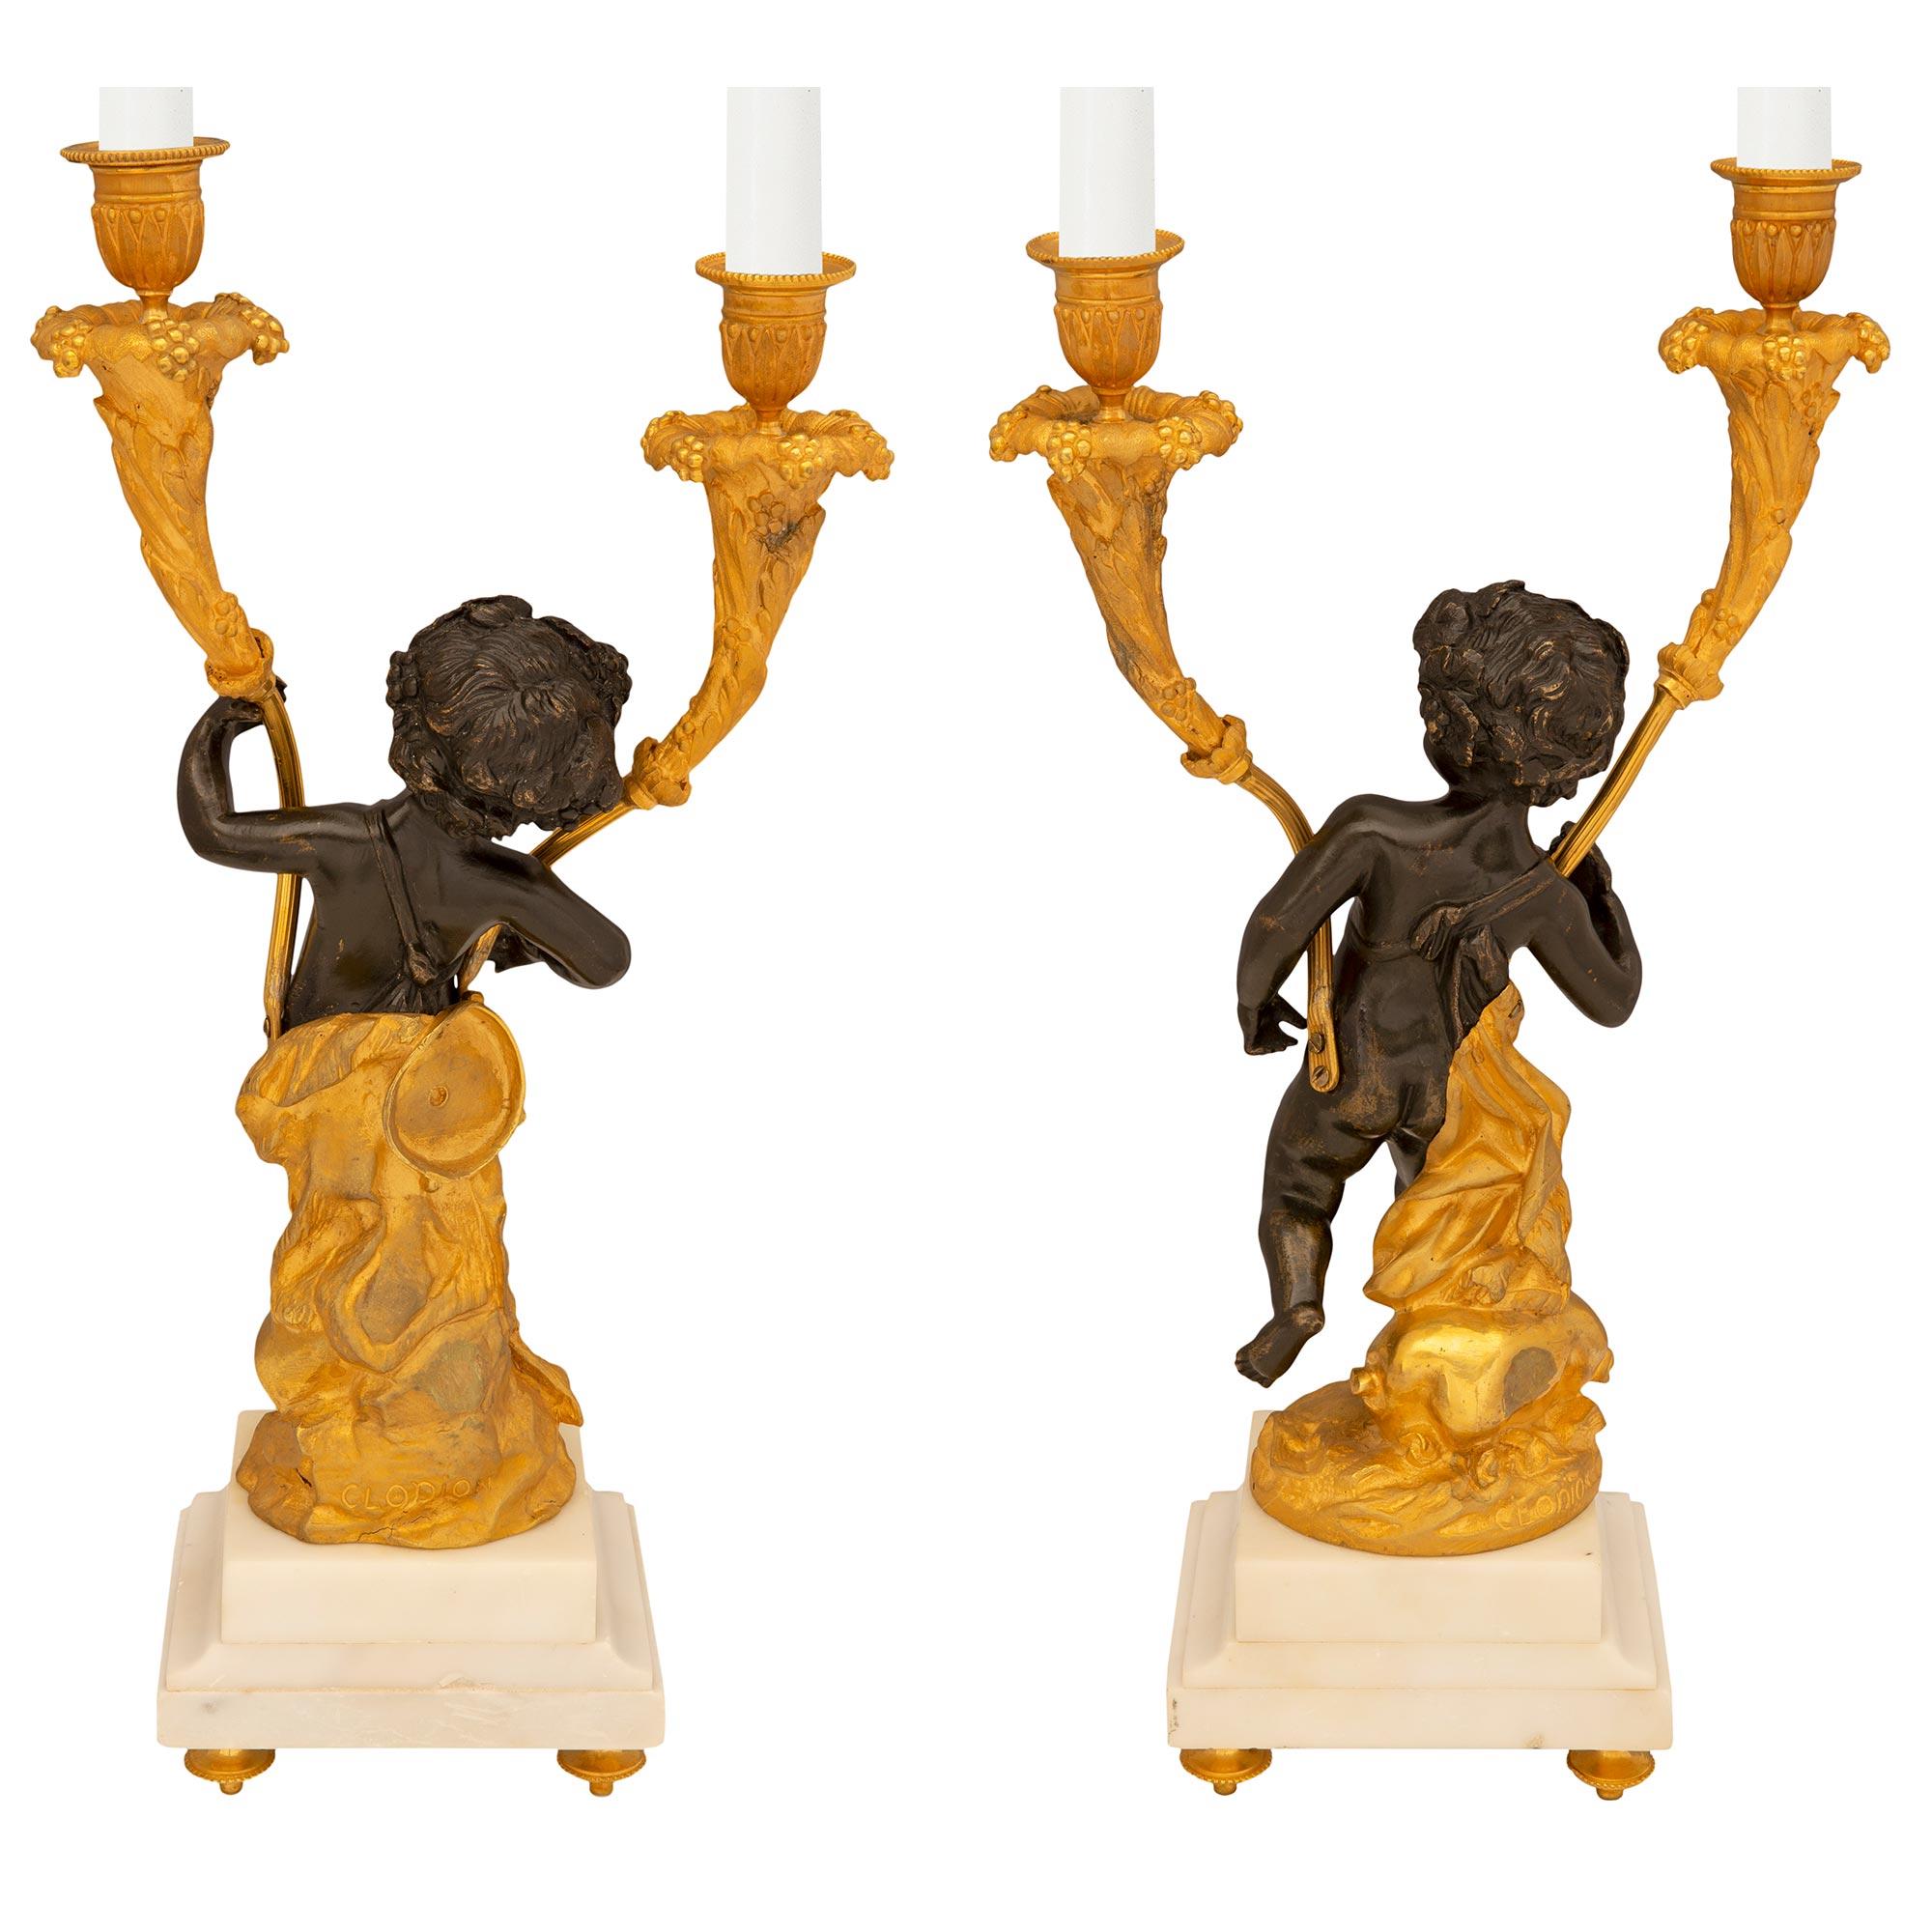 An elegant true pair of French 19th century Louis XVI st. ormolu, patinated bronze and white Carrara marble candelabras, signed Clodion. Each two arm candelabra is raised by fine topie shaped ormolu feet below a square white Carrara marble base. The